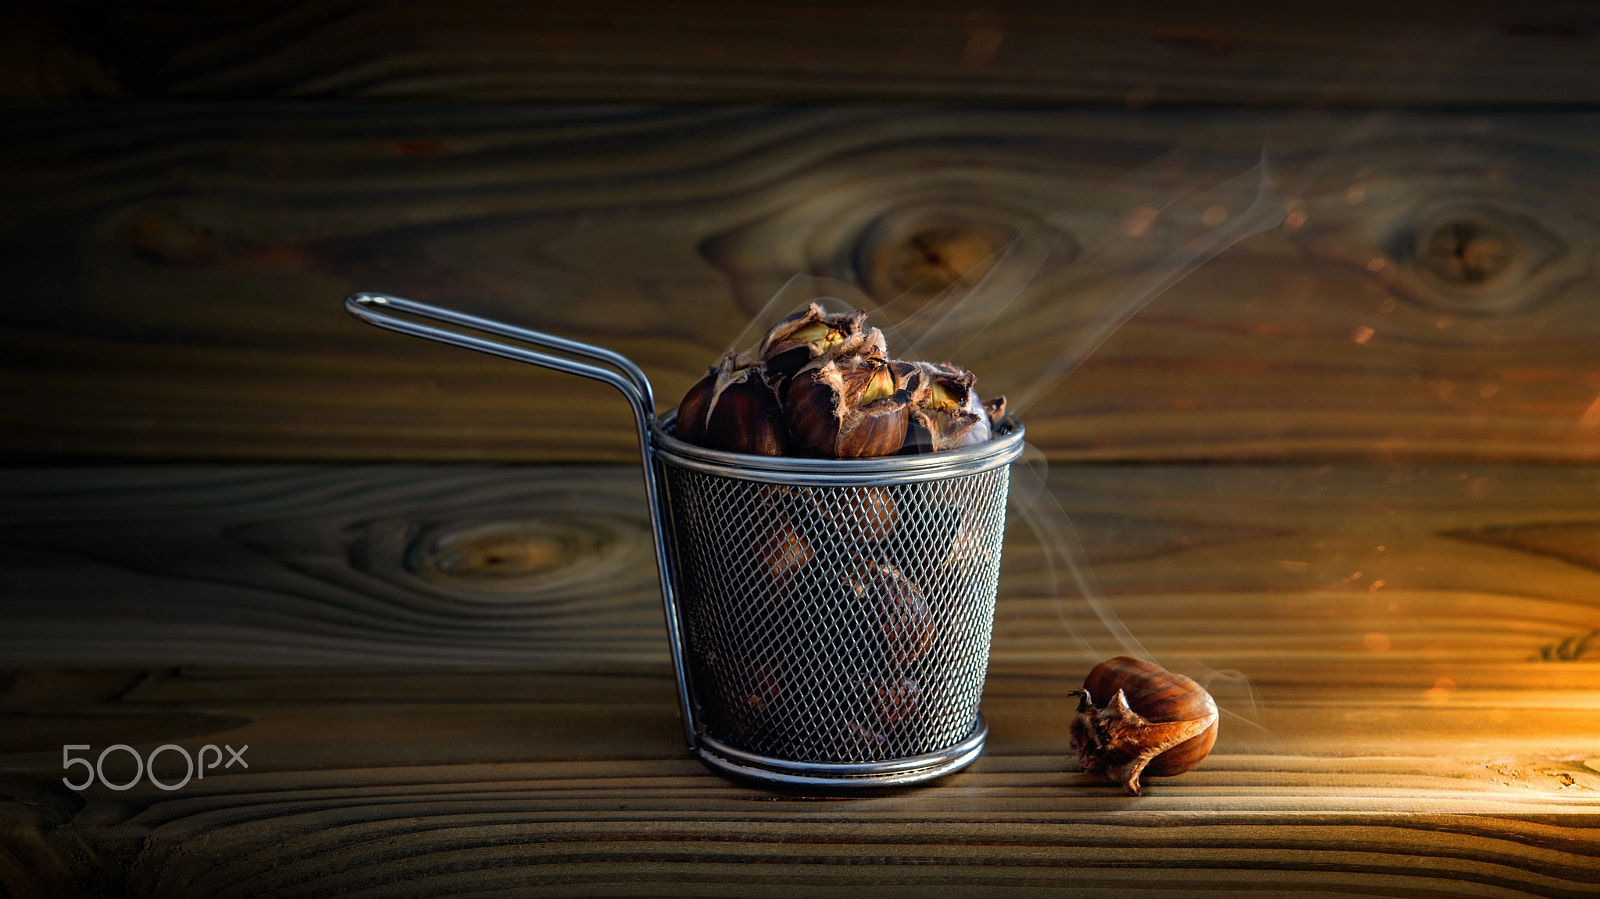 Nikon D800 sample photo. Roasted chestnuts in basket photography